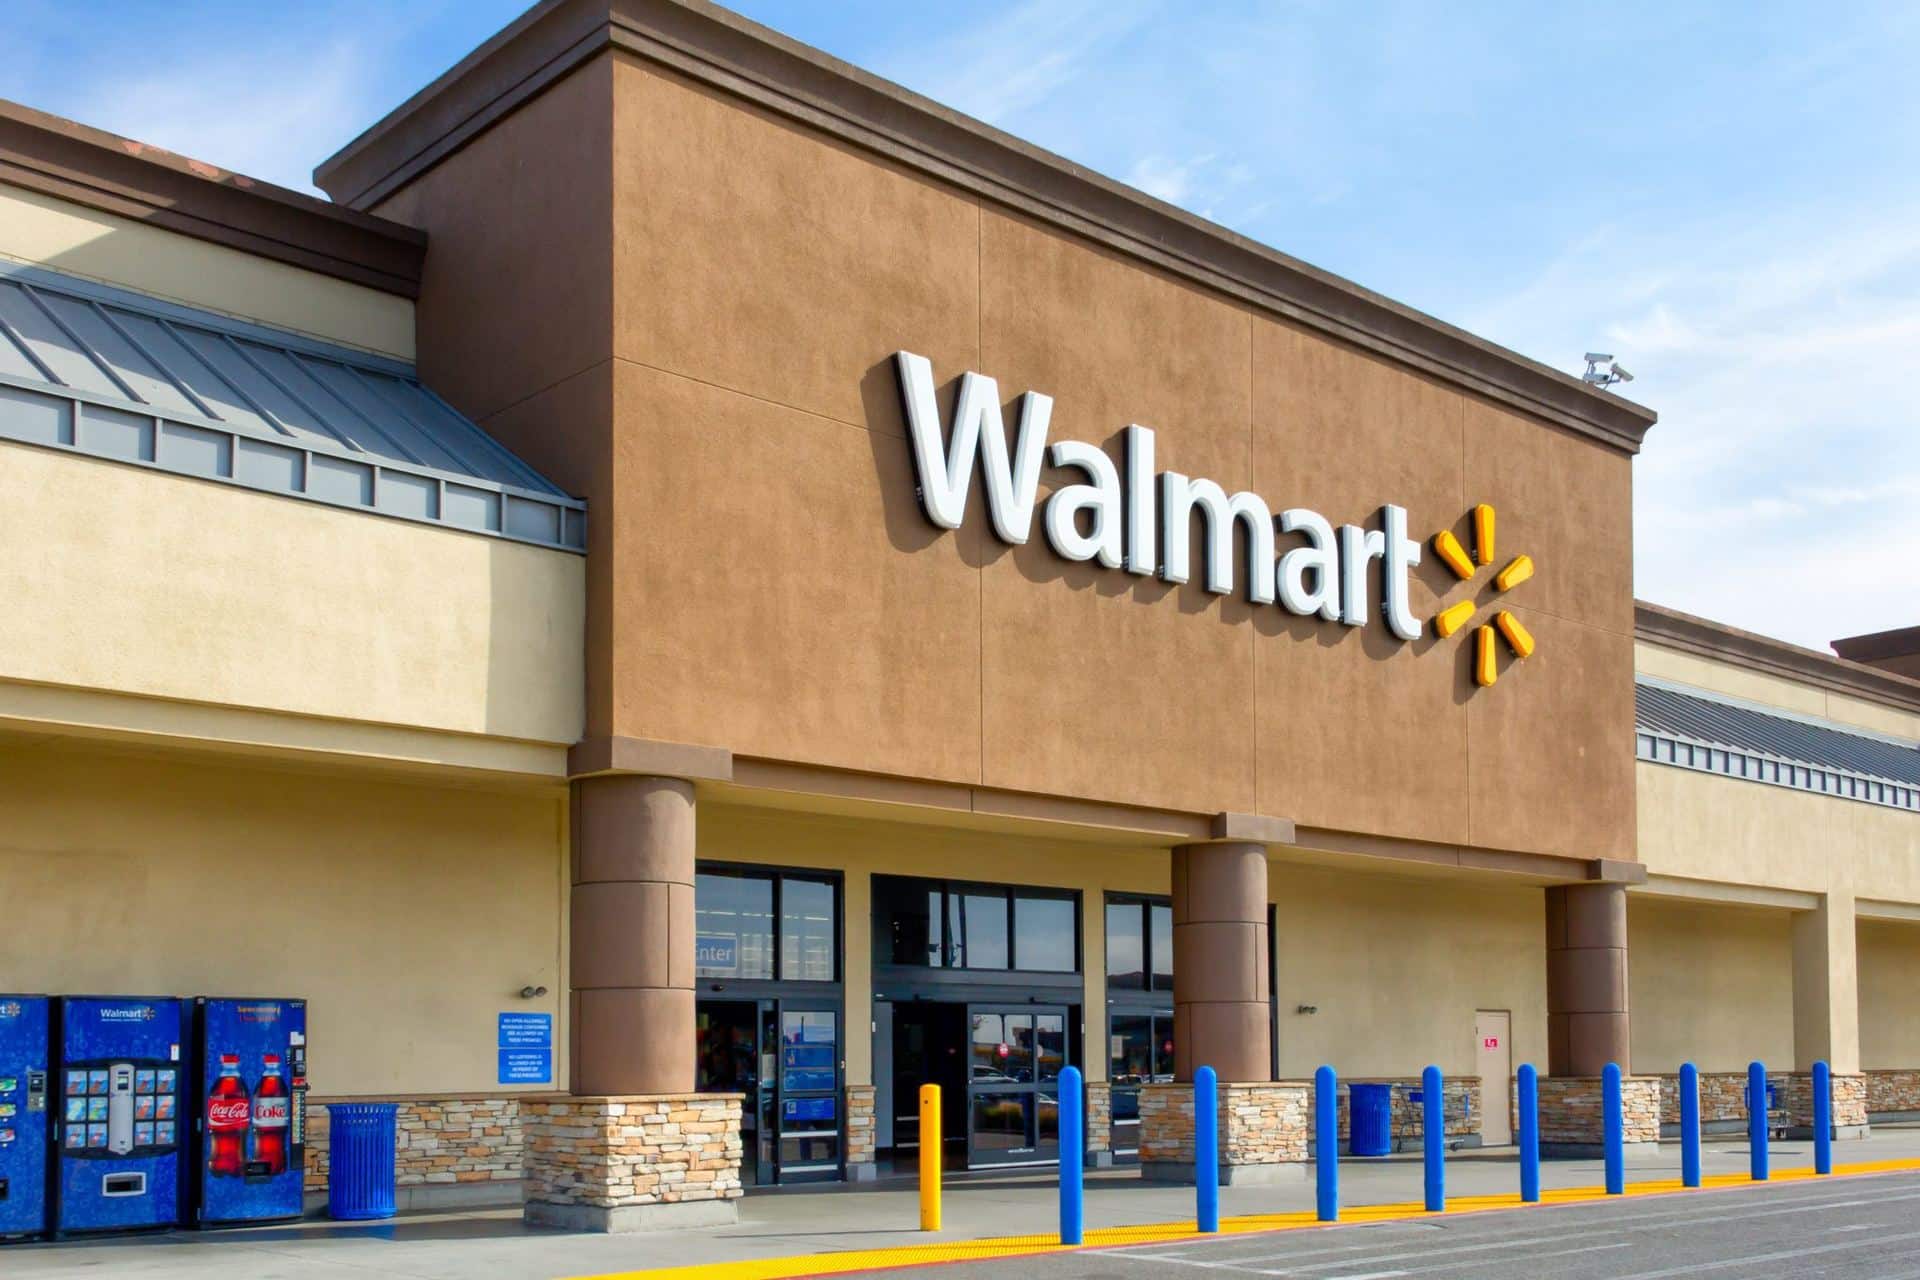 Walmart’s New Patent Could Mean No Privacy on Premises